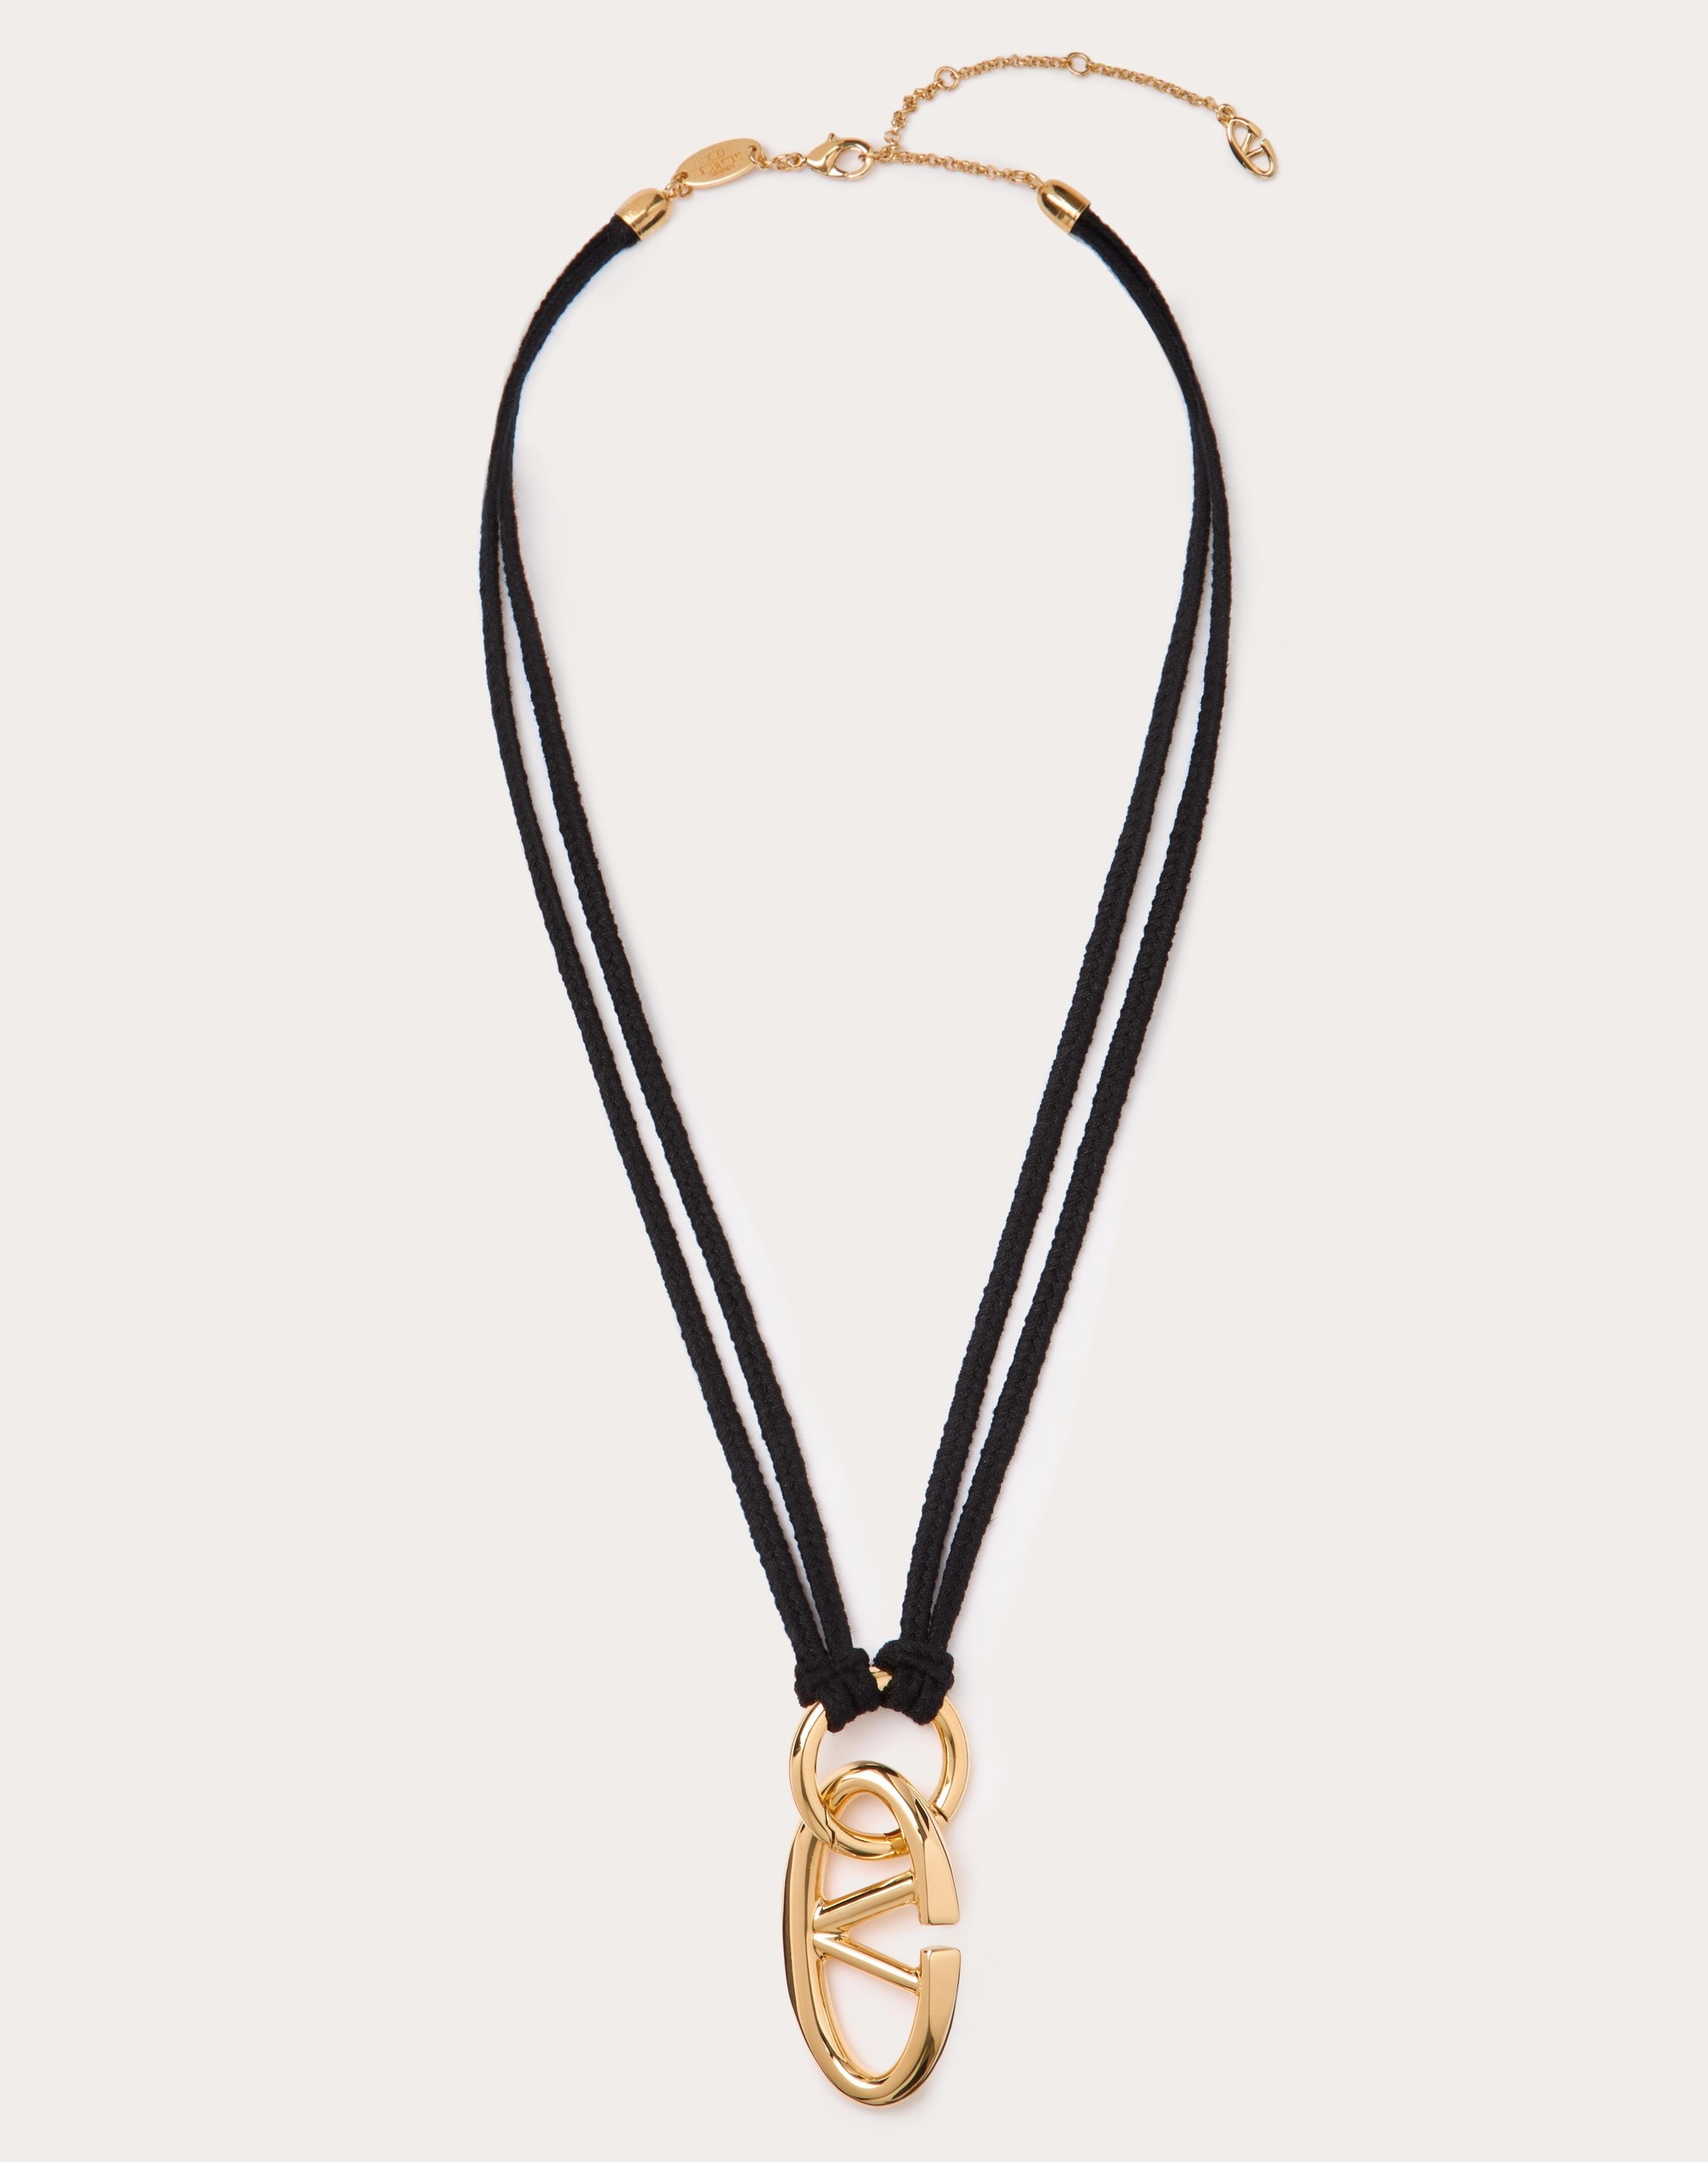 VLOGO THE BOLD EDITION ROPE AND METAL NECKLACE - 1